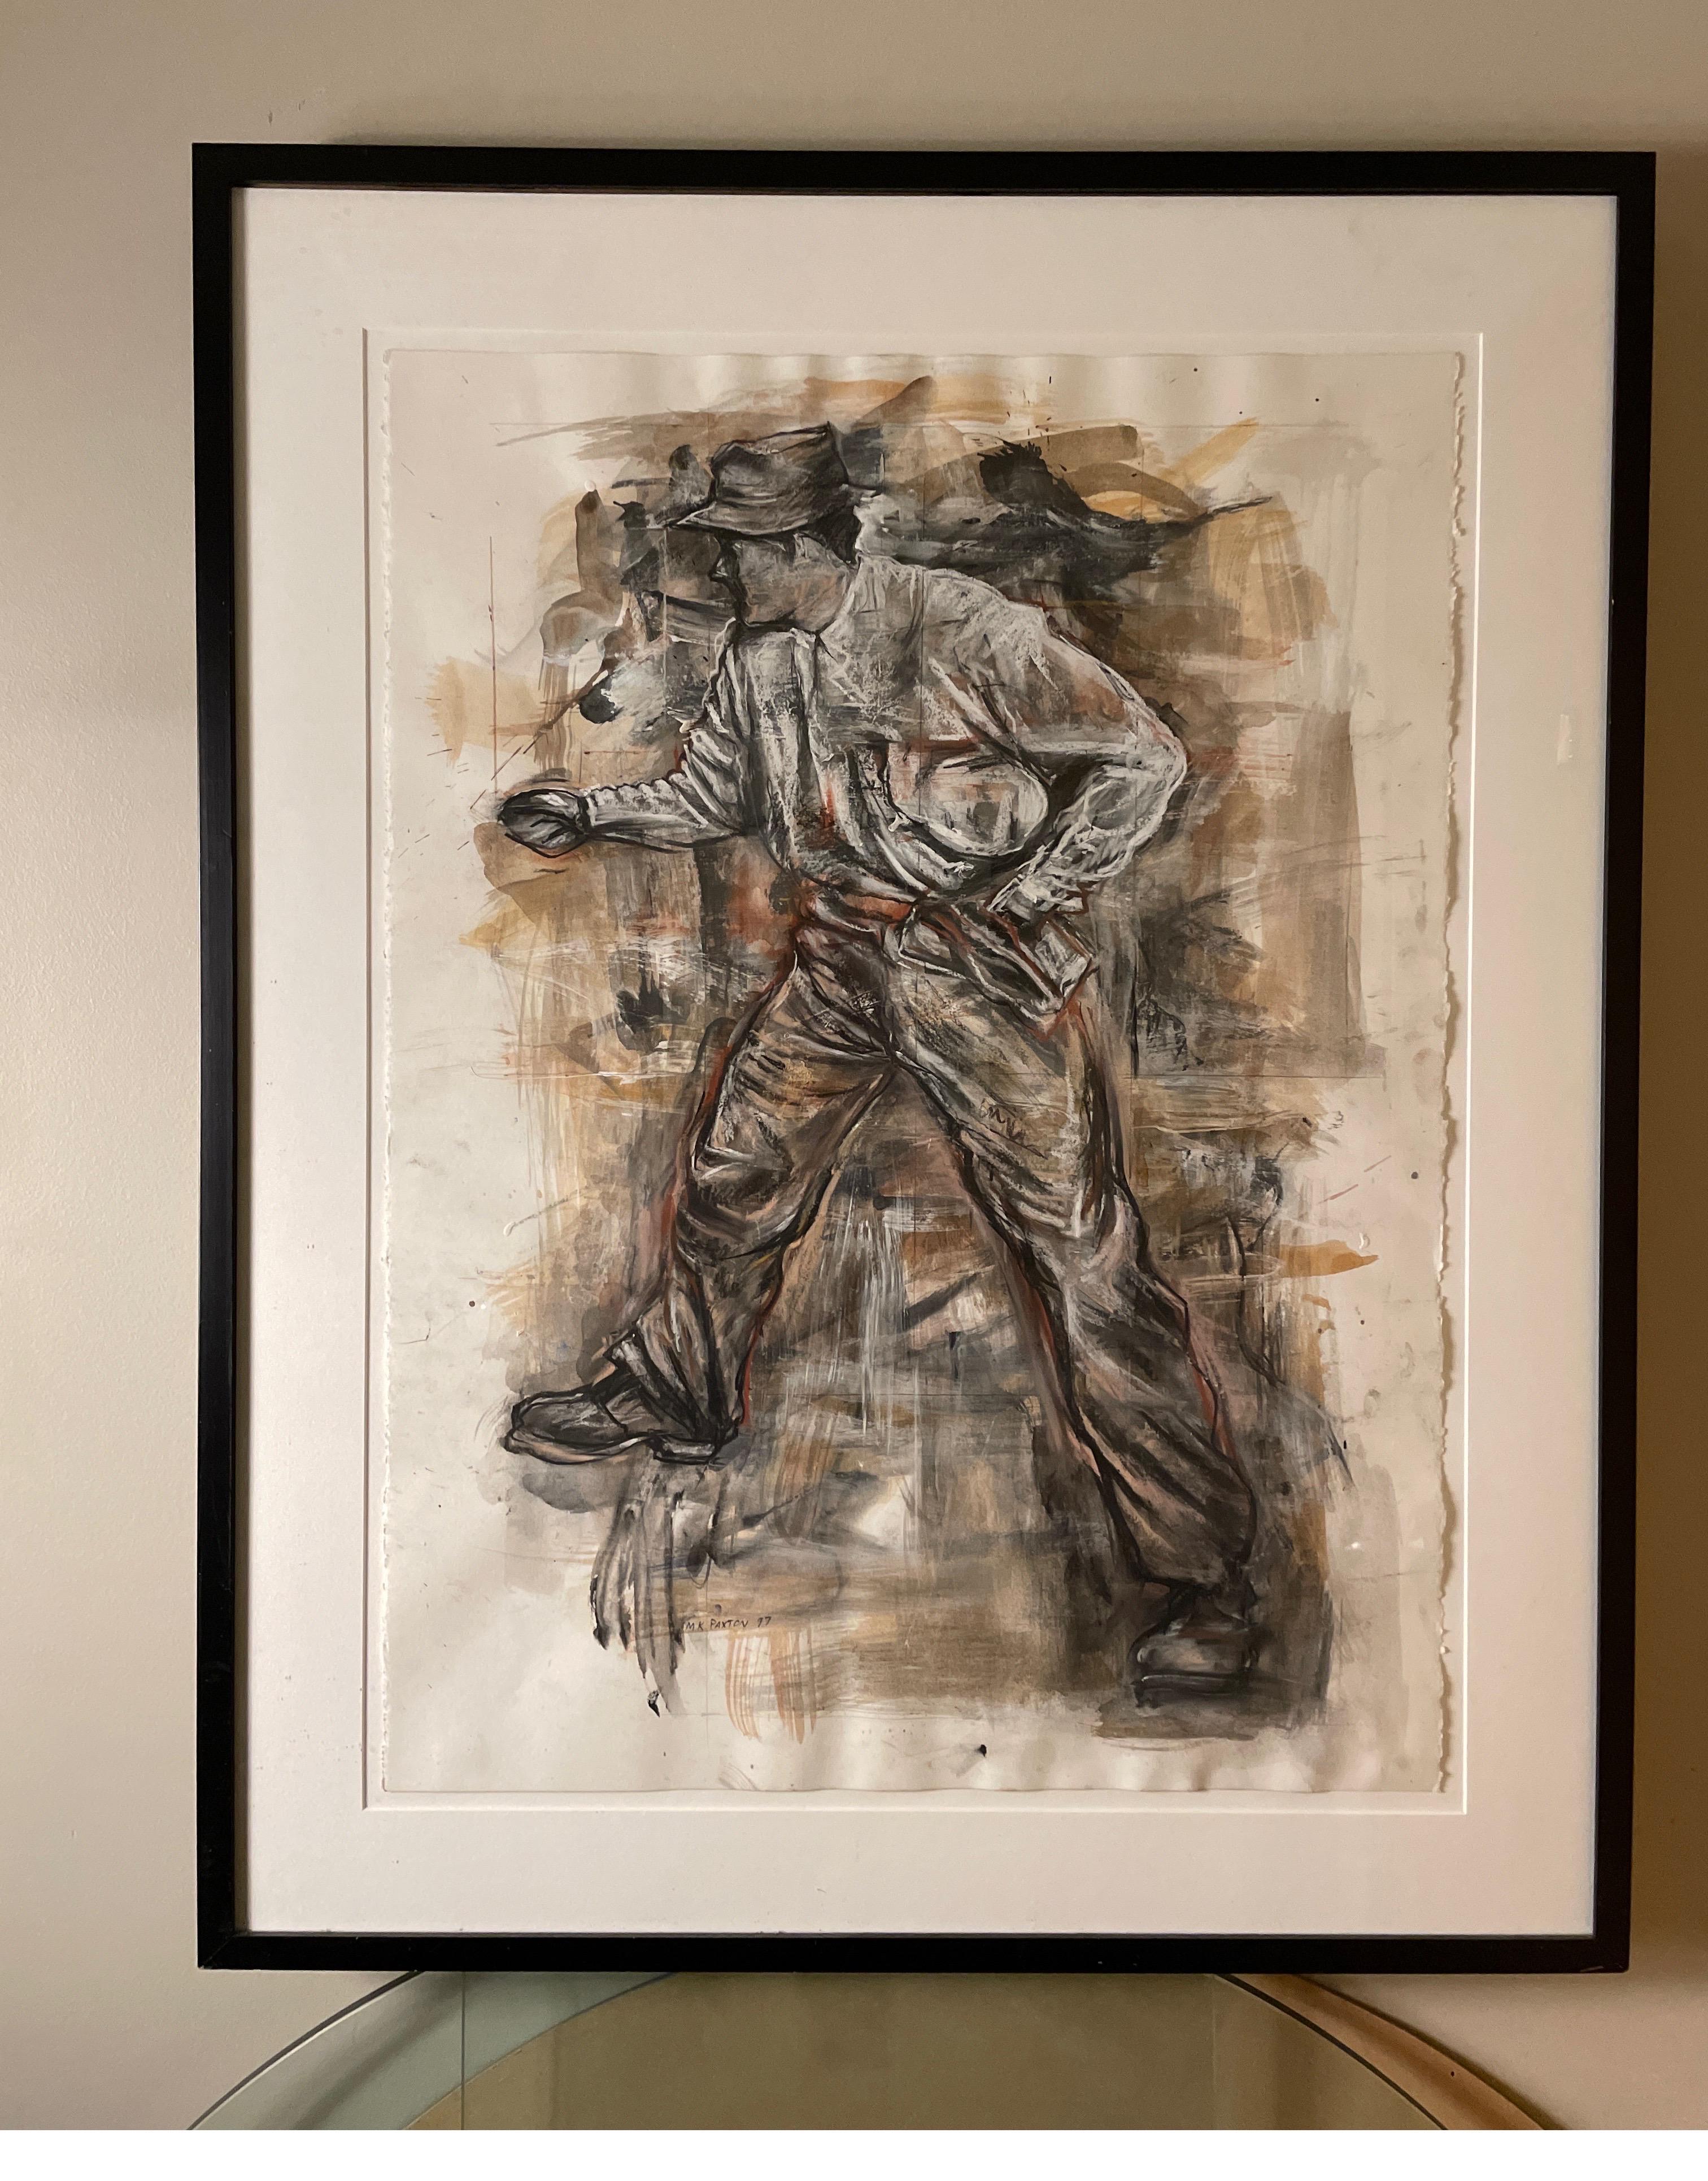 An ink, watercolor, charcoal piece of art by Michael K Paxton from his “worker” series